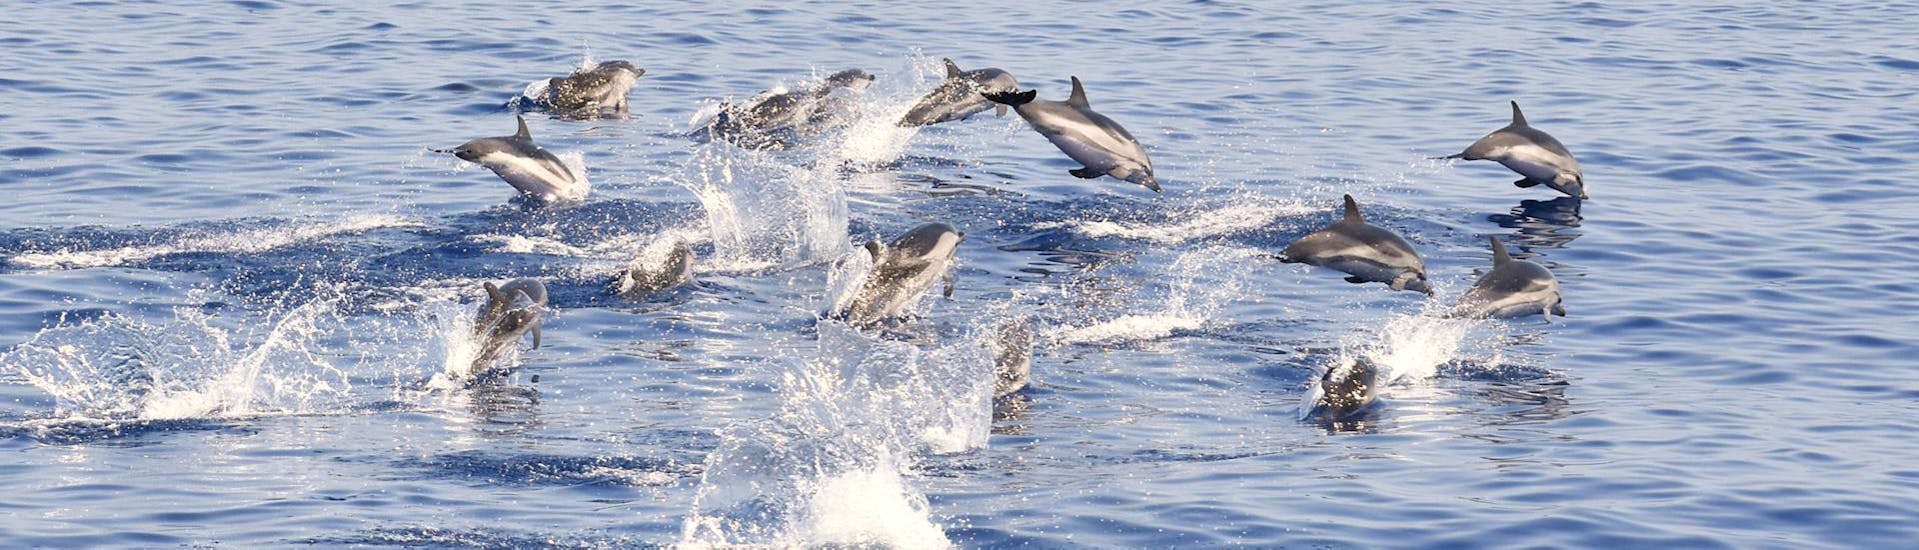 Some dolphins spotted during the boat trip from Savona to Pelagos Sanctuary with cetacean watching with BMC Yacht.